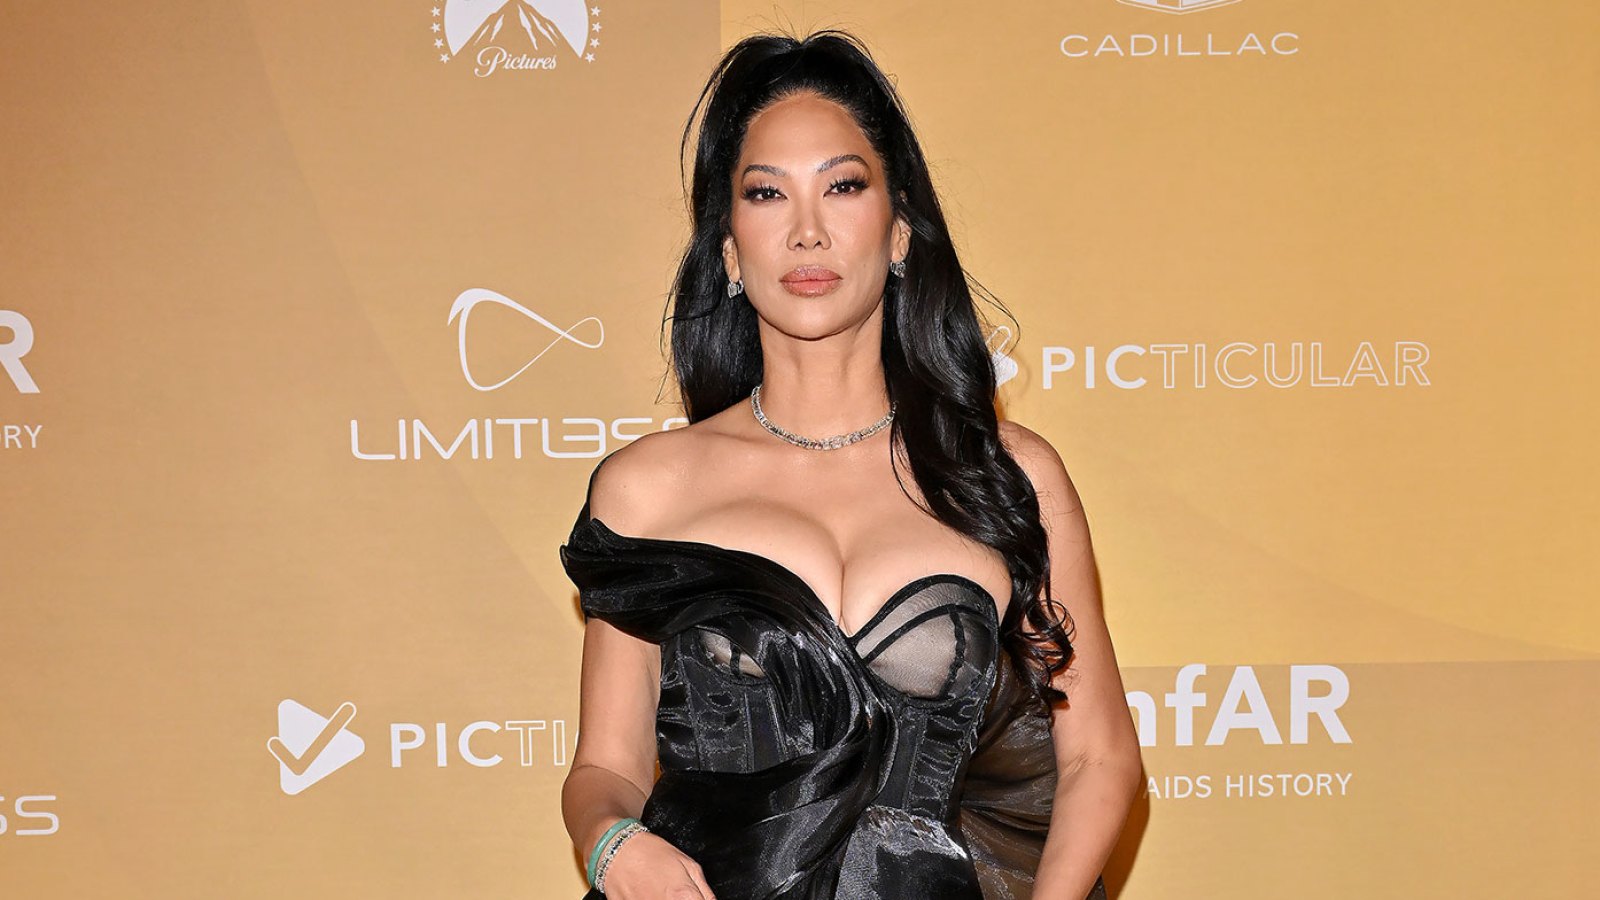 Feature Kimora Lee Simmons Was Embarrassed About Daughter Aoki Lee Simmons Age-Gap Romance